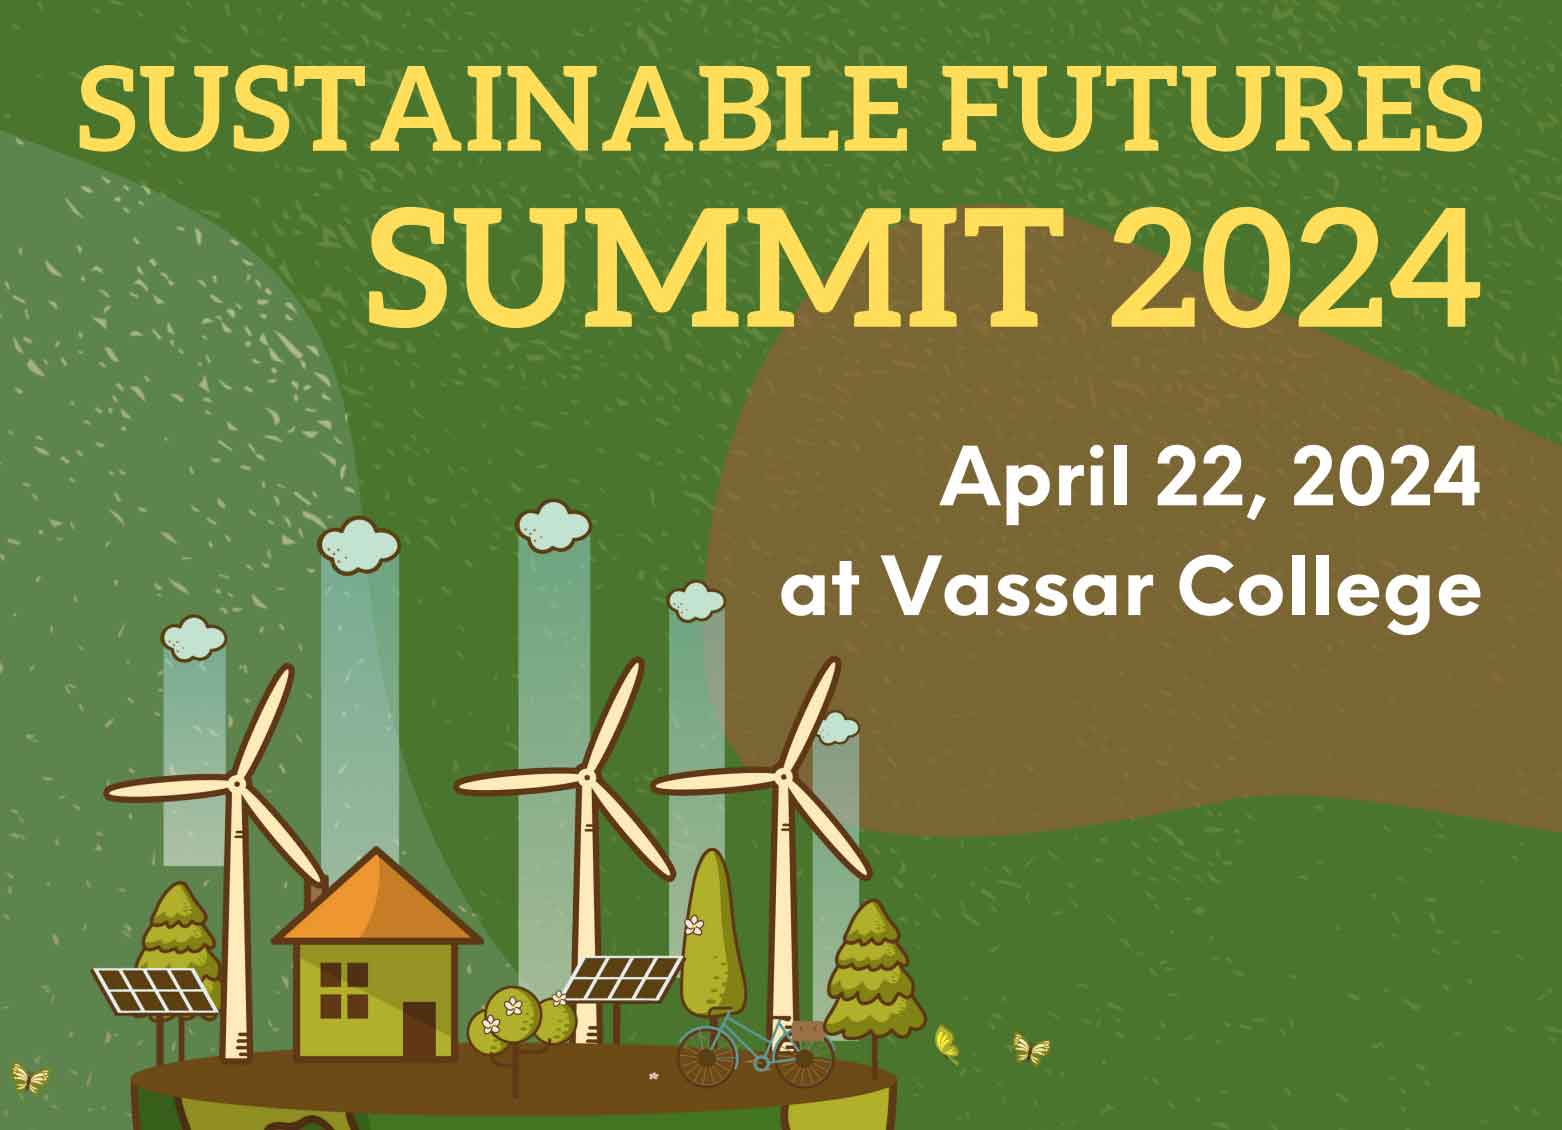 Illustration of a building beneath clouds and among wind turbines with text that reads" Sustainable Futures Summit 2024, April 22, 2024 at Vassar College.